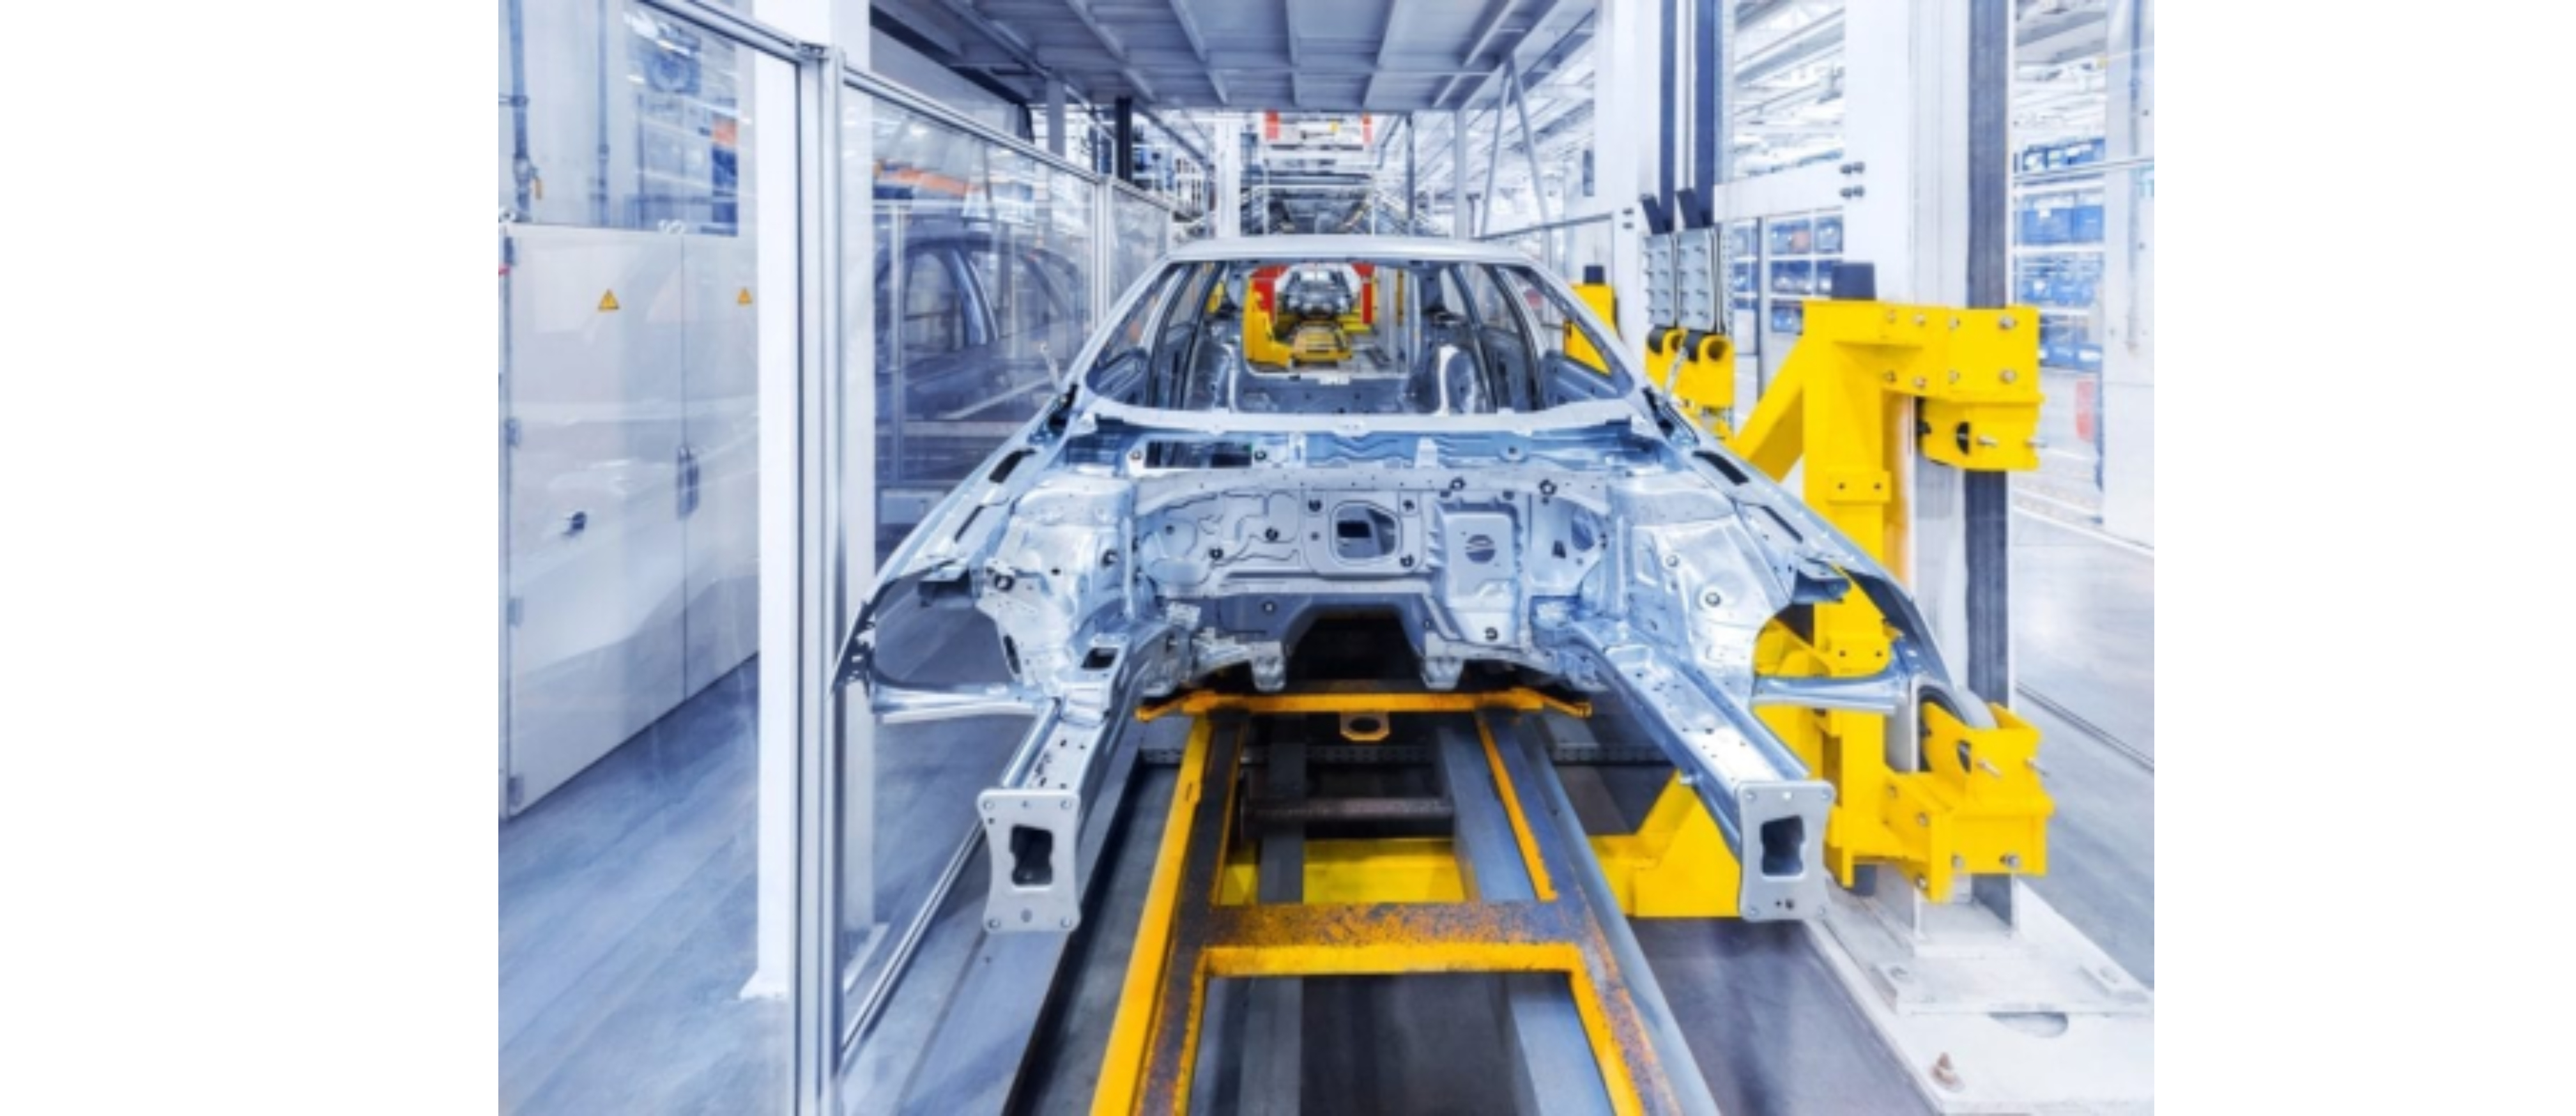 Predictive Maintenance In The Automotive Industry